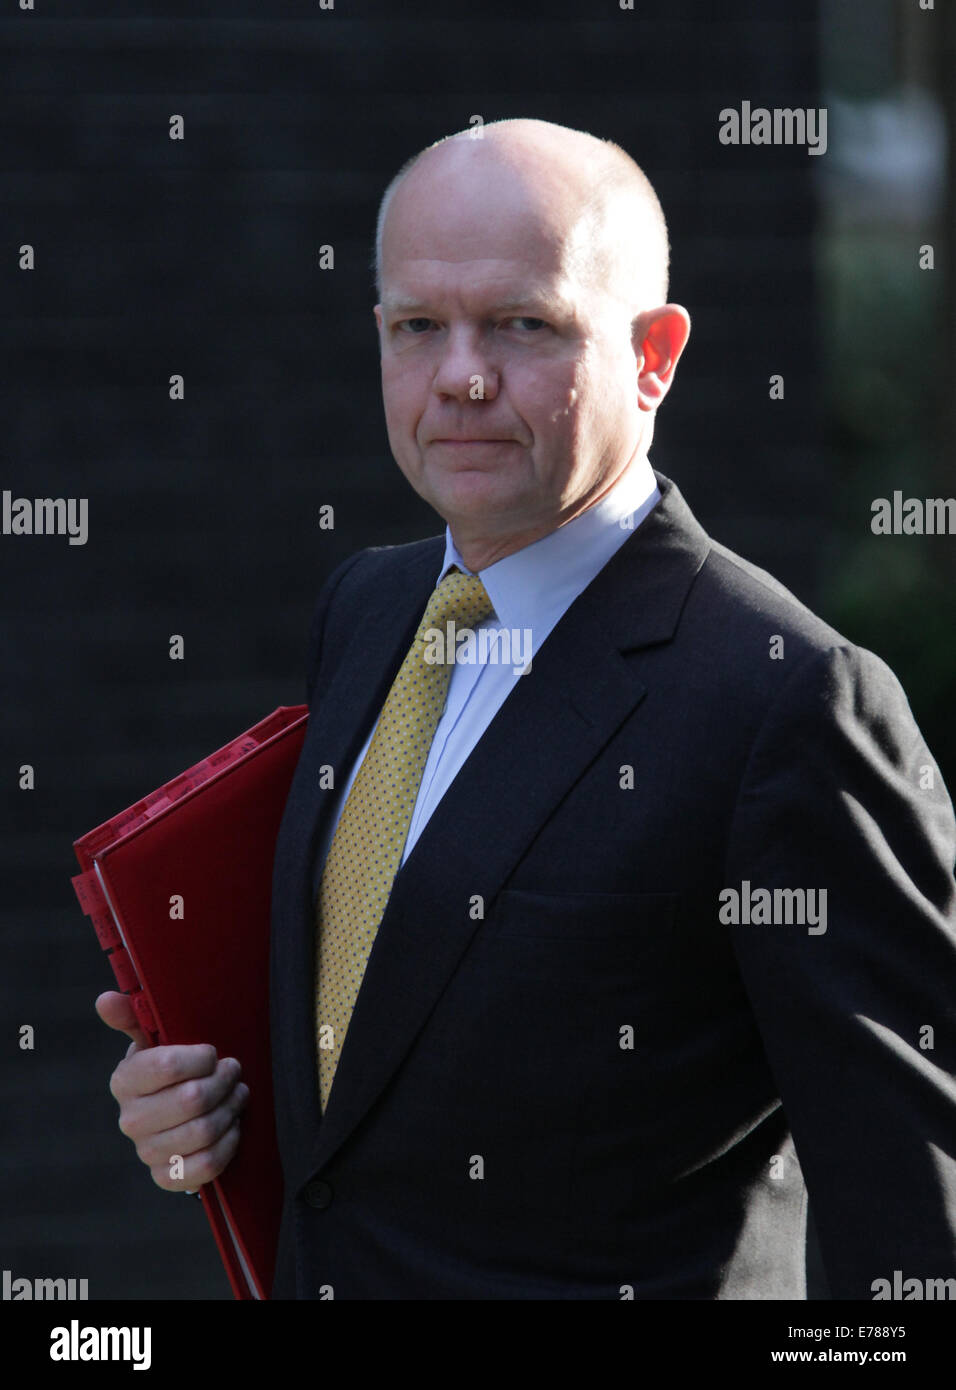 London,UK, 9th September 2014: Leader of the House of Commons William Hague arrives for a Cabinet meeting held at 10 Downing Str Stock Photo